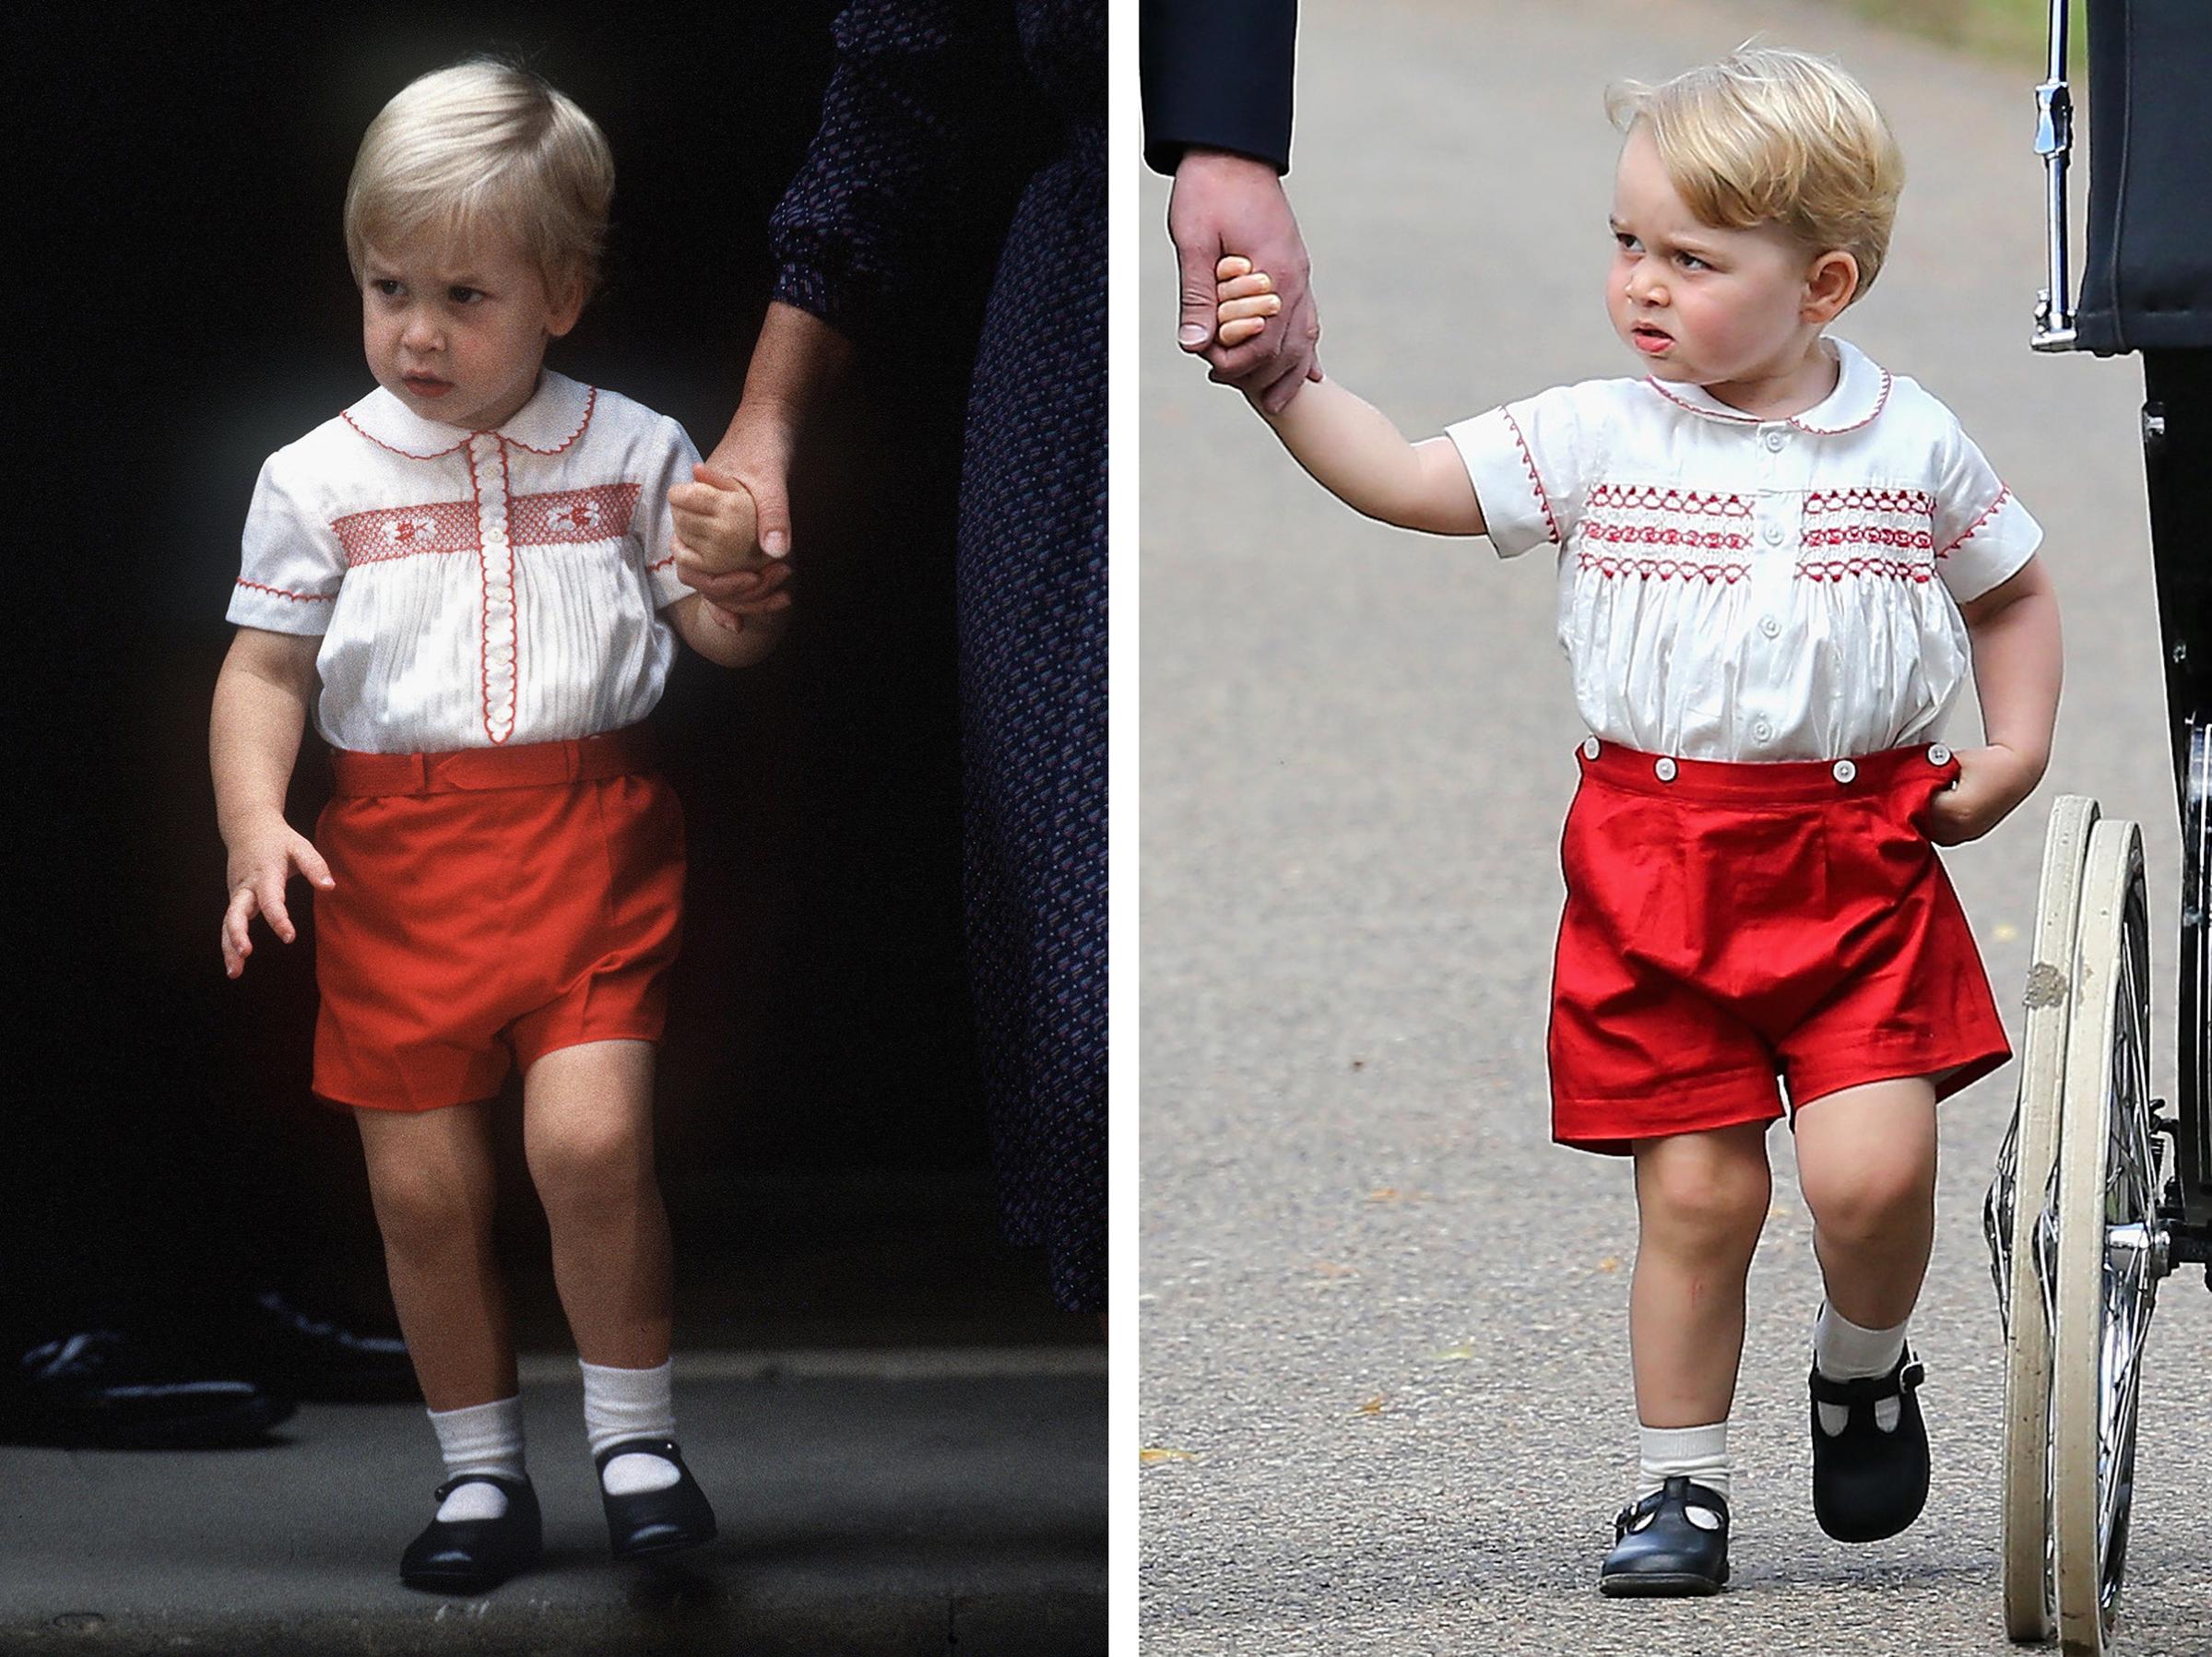 Prince William (L) and Prince George wearing similar clothing.